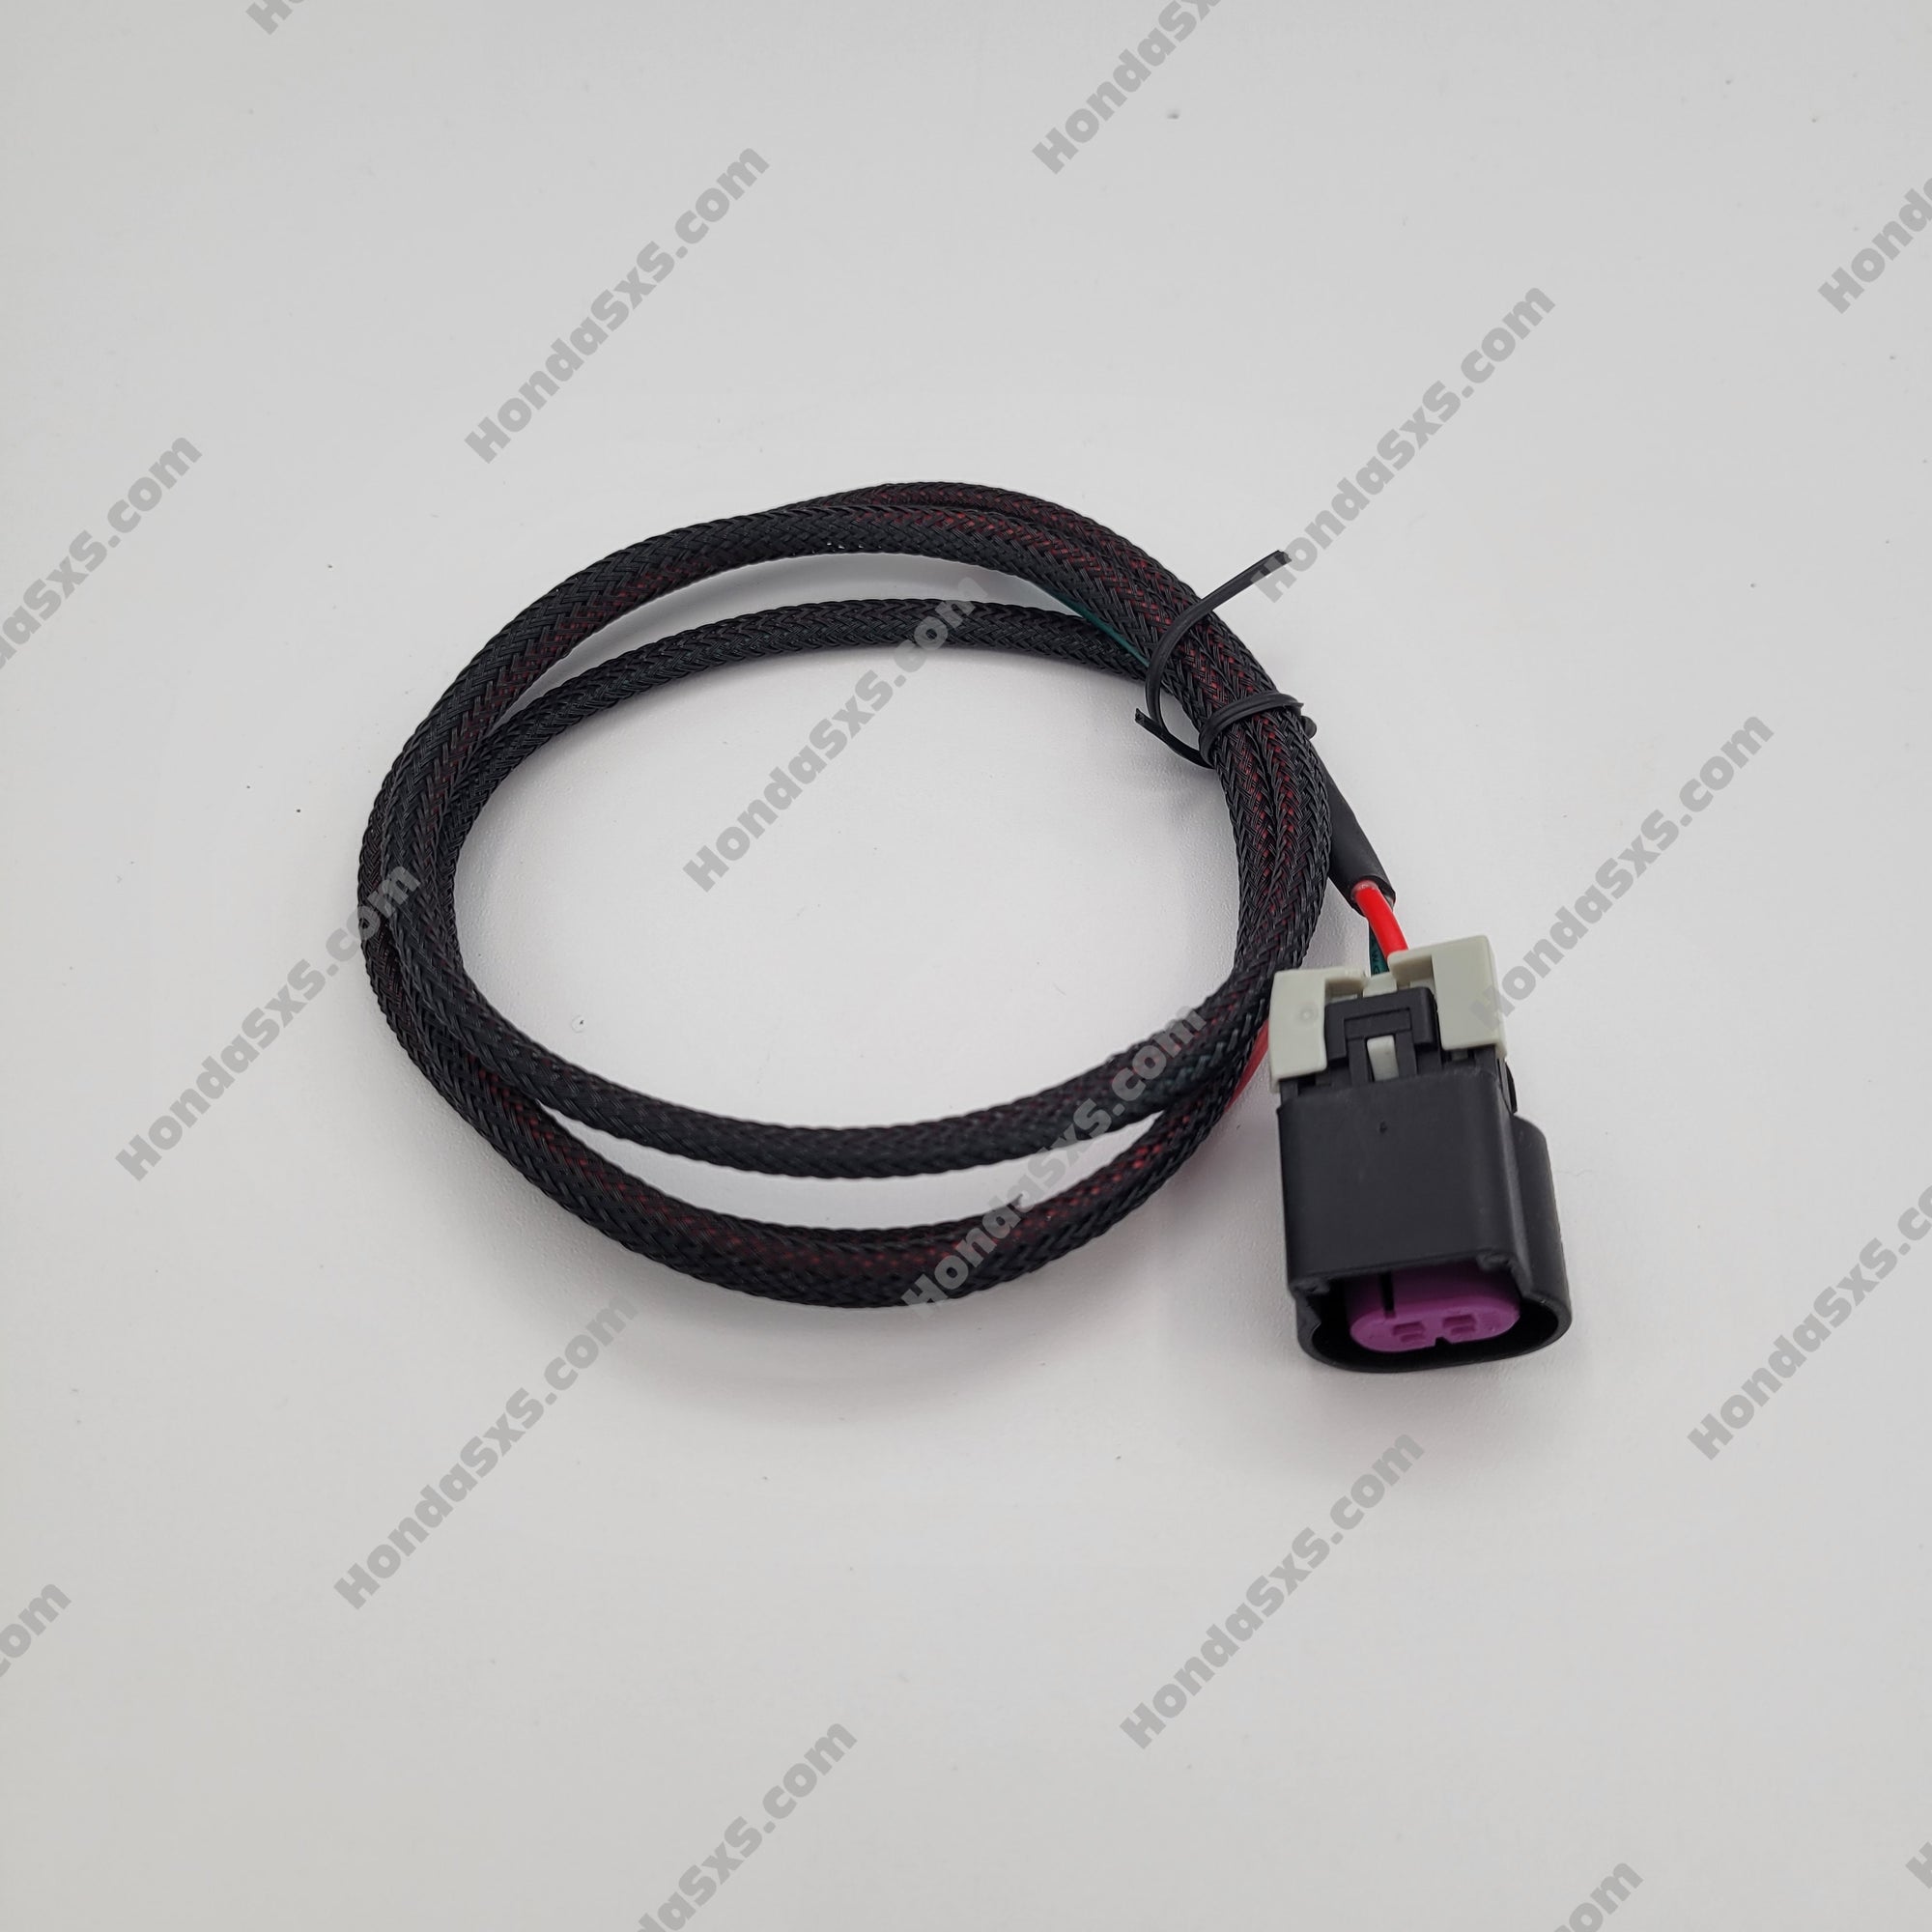 Honda Fuse Box Accessory Pigtails Wiring. - Similar to 0SZ05-HL6-A00